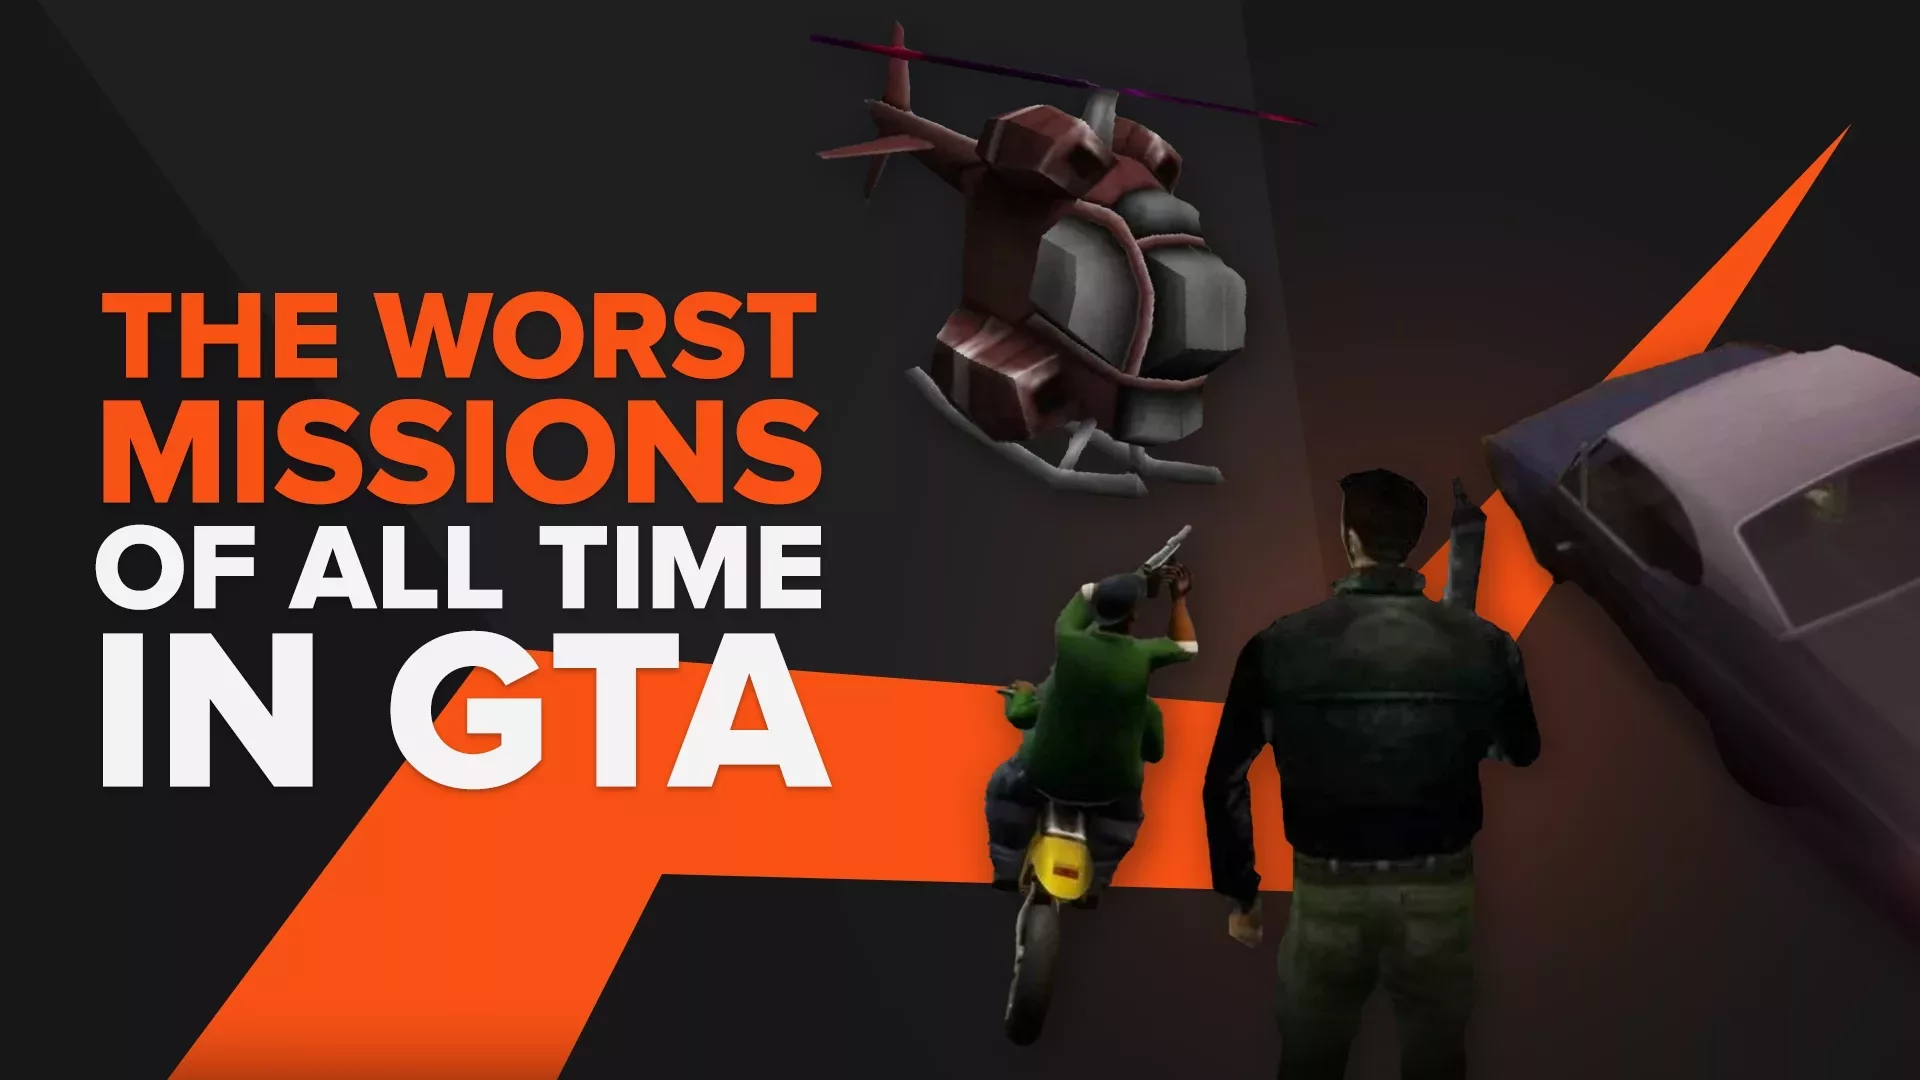 The 10 Worst Missions of All Time in GTA